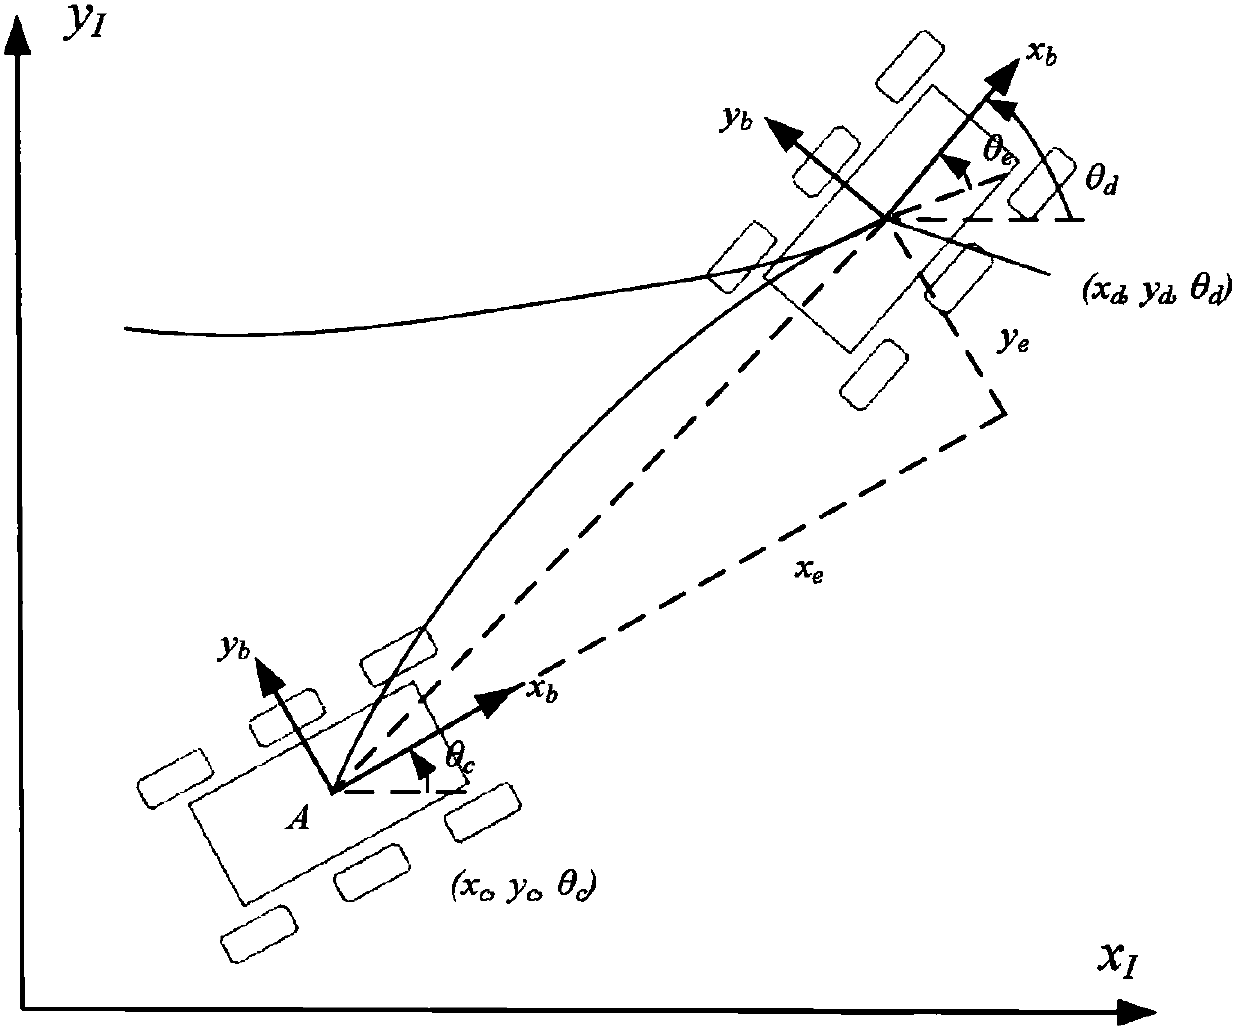 Unmanned vehicle route tracking control method based on skid turn and slippage coupling estimation